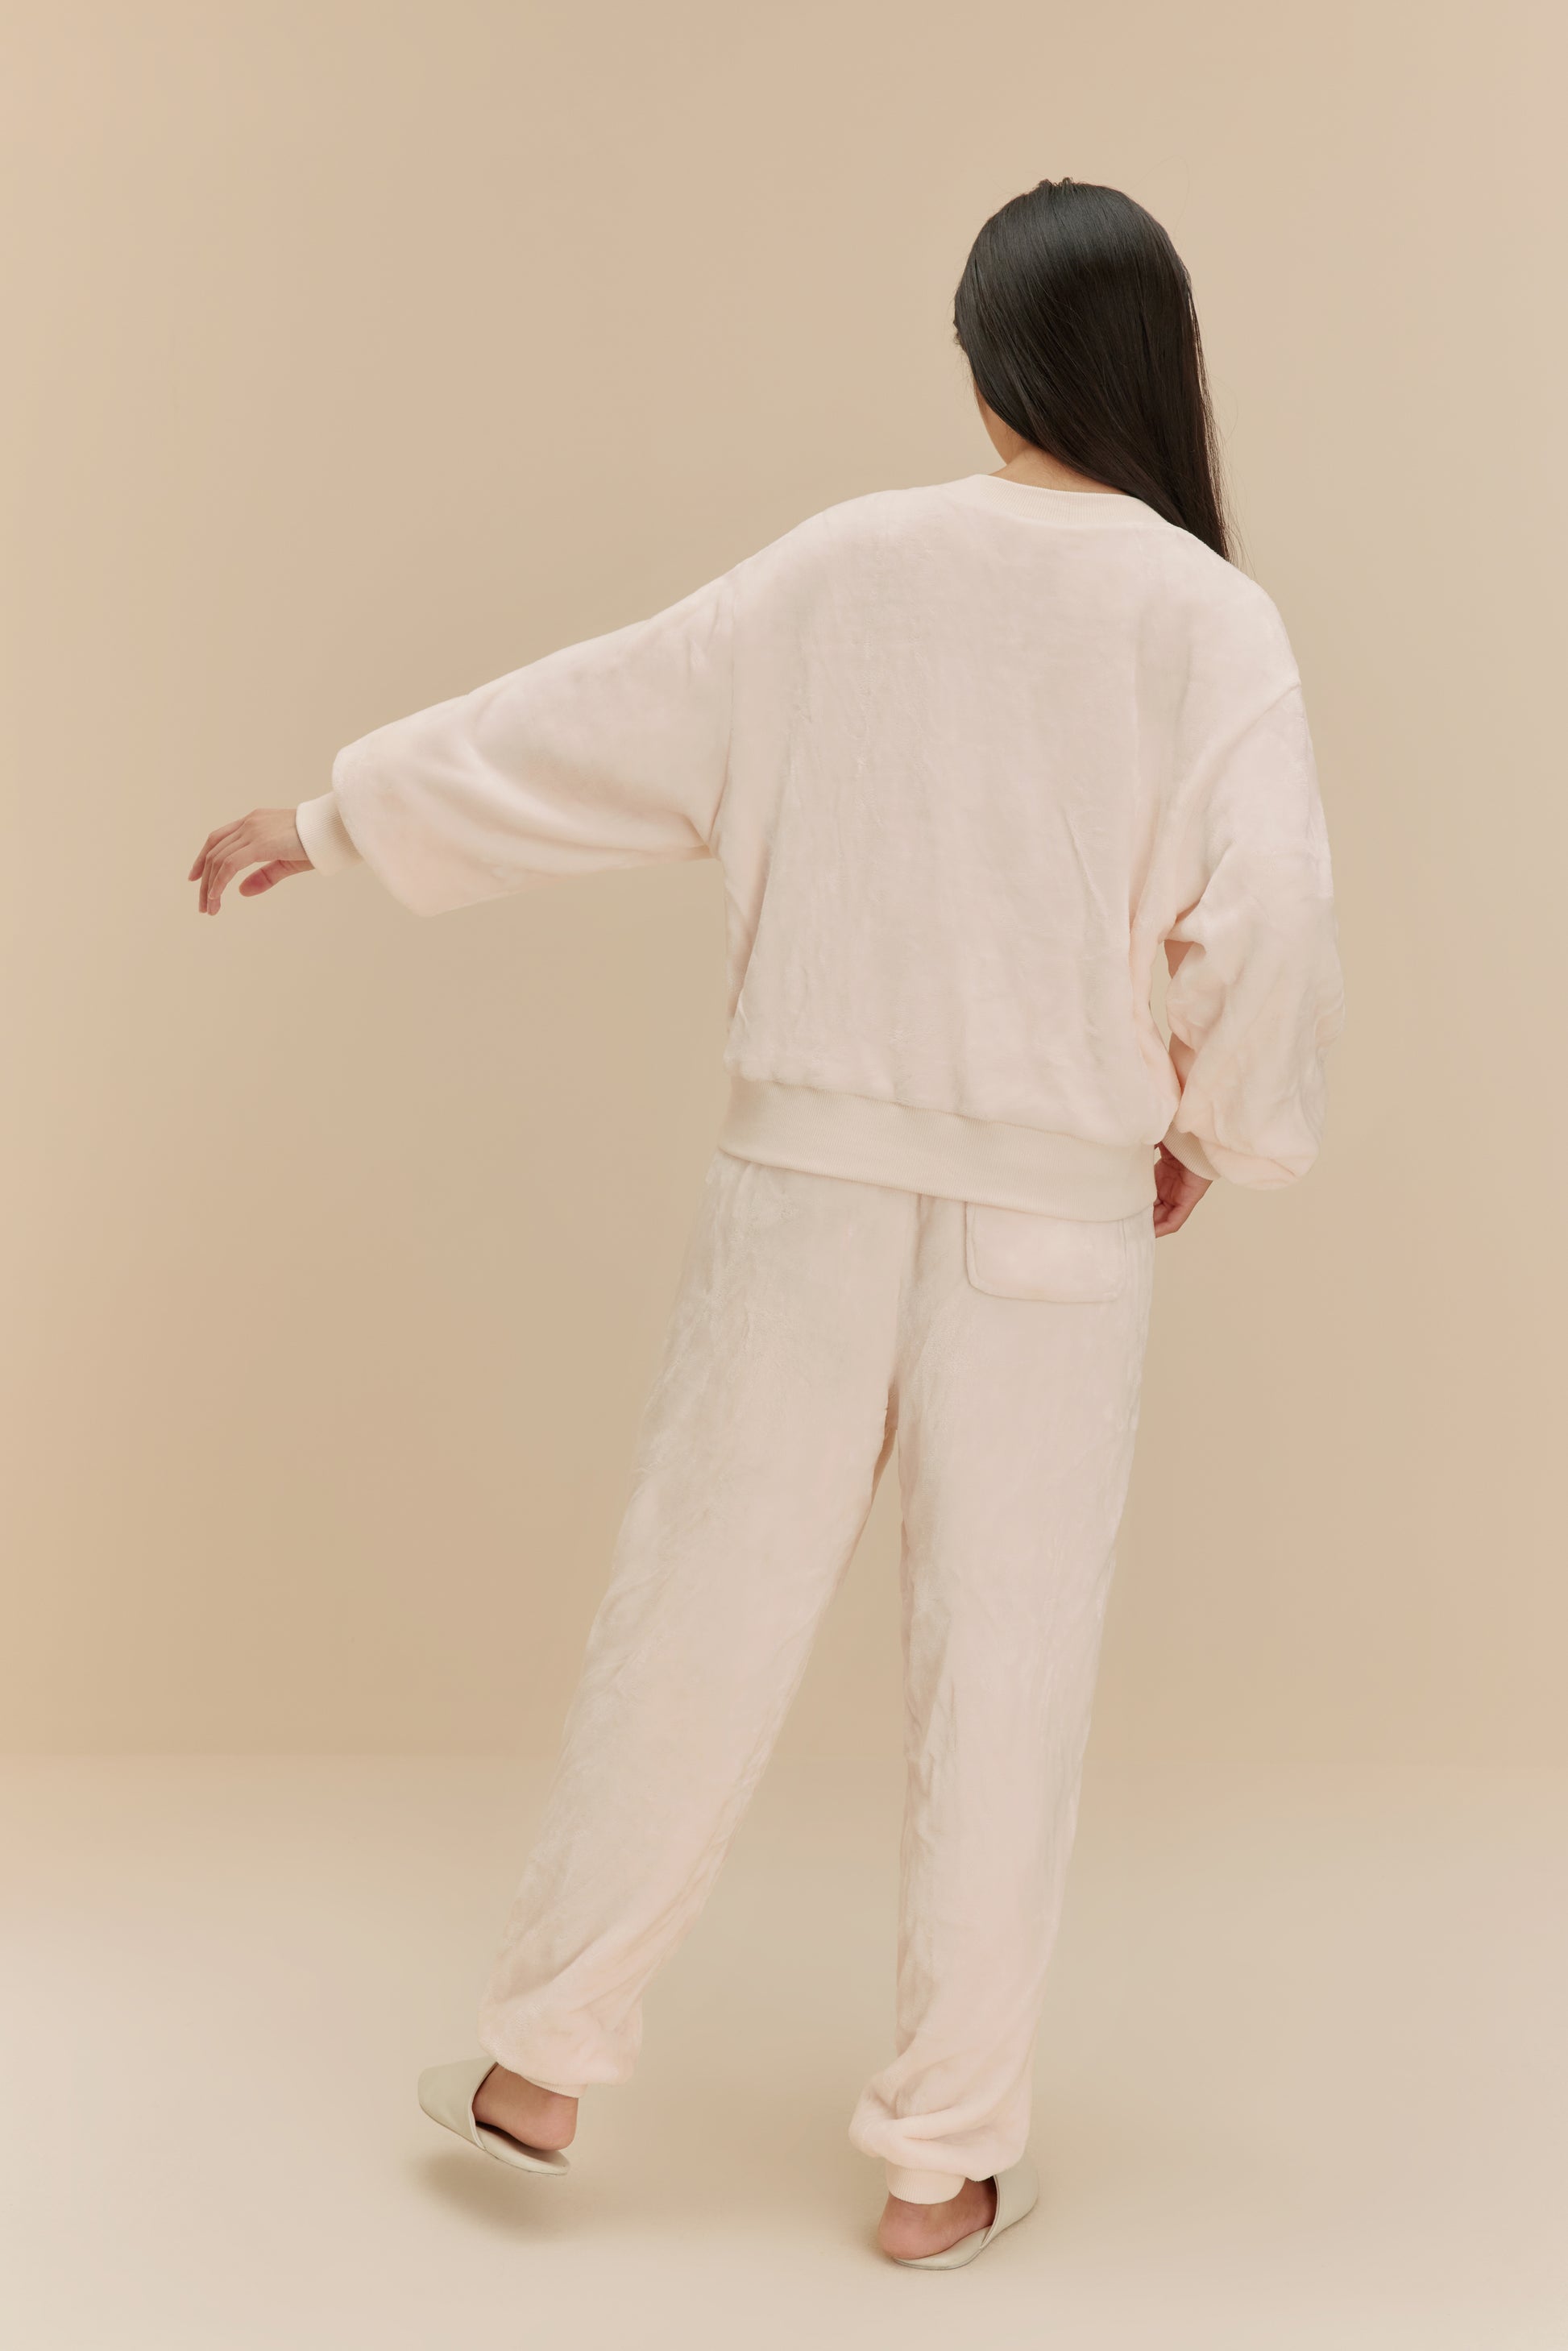 MFCHY Coral Fleece Pajamas for Women with Thickened Flannel